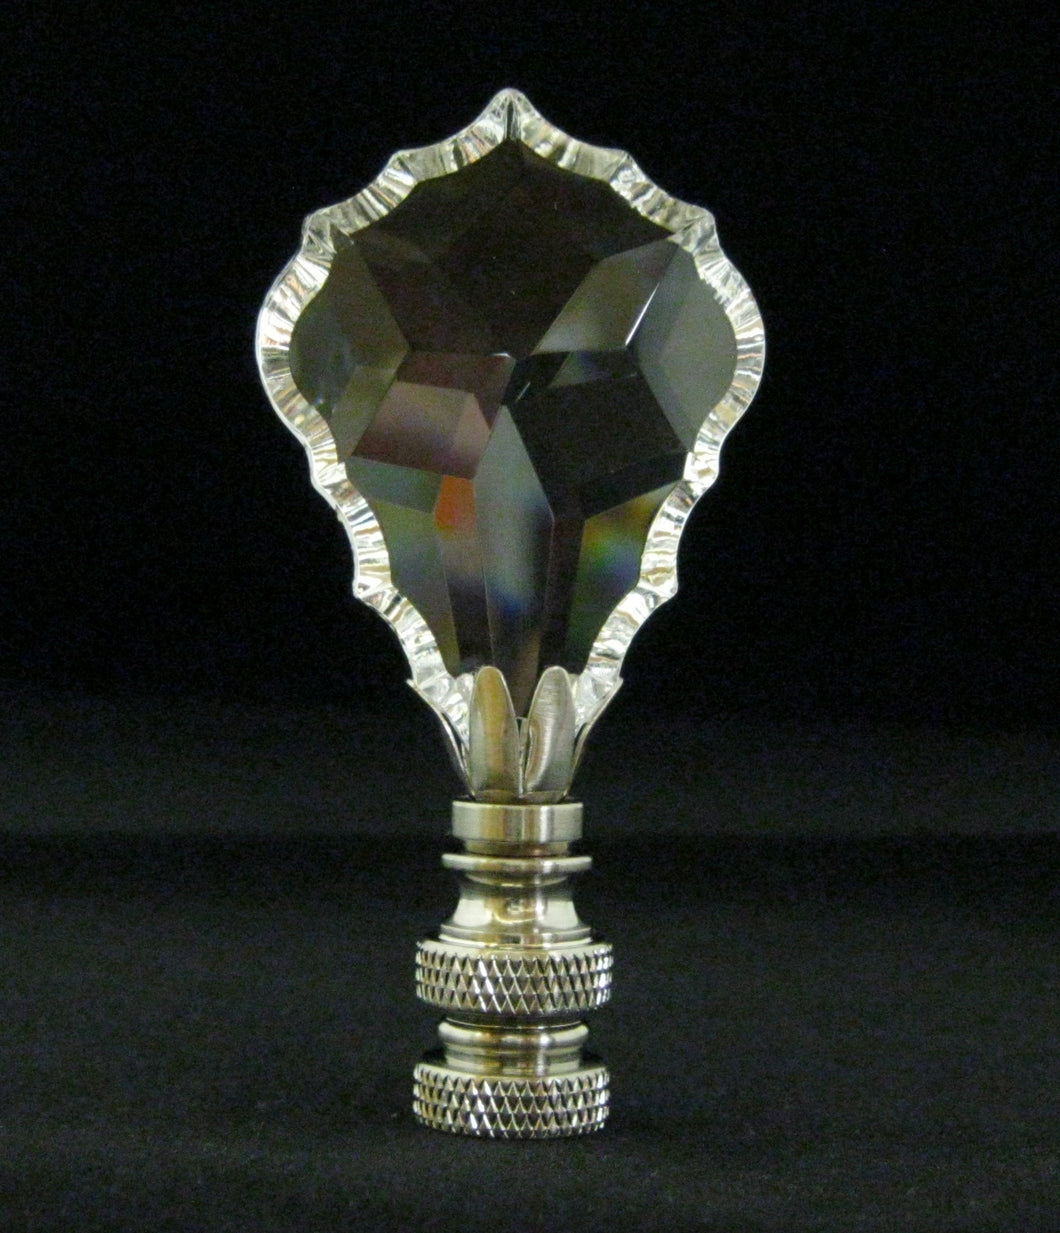 CRYSTAL MAPLE LEAF-Lamp Finial-Small-Clear, Satin Nickel Finish